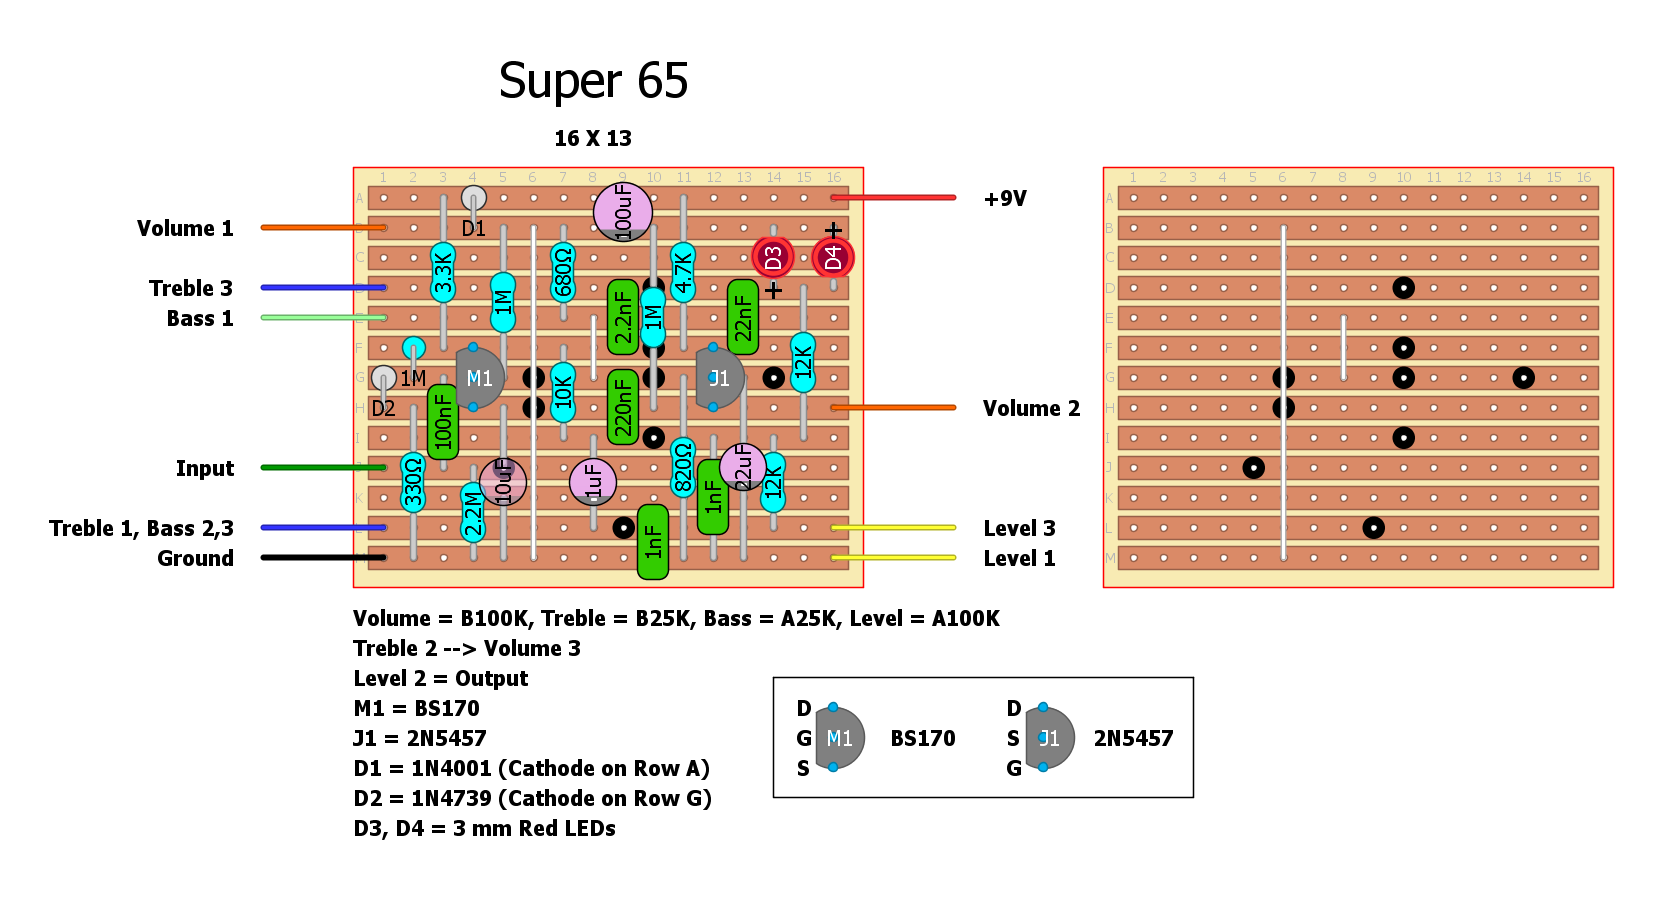 http://guitar-fx-layouts.238.s1.nabble.com/file/n42826/Super_65.png